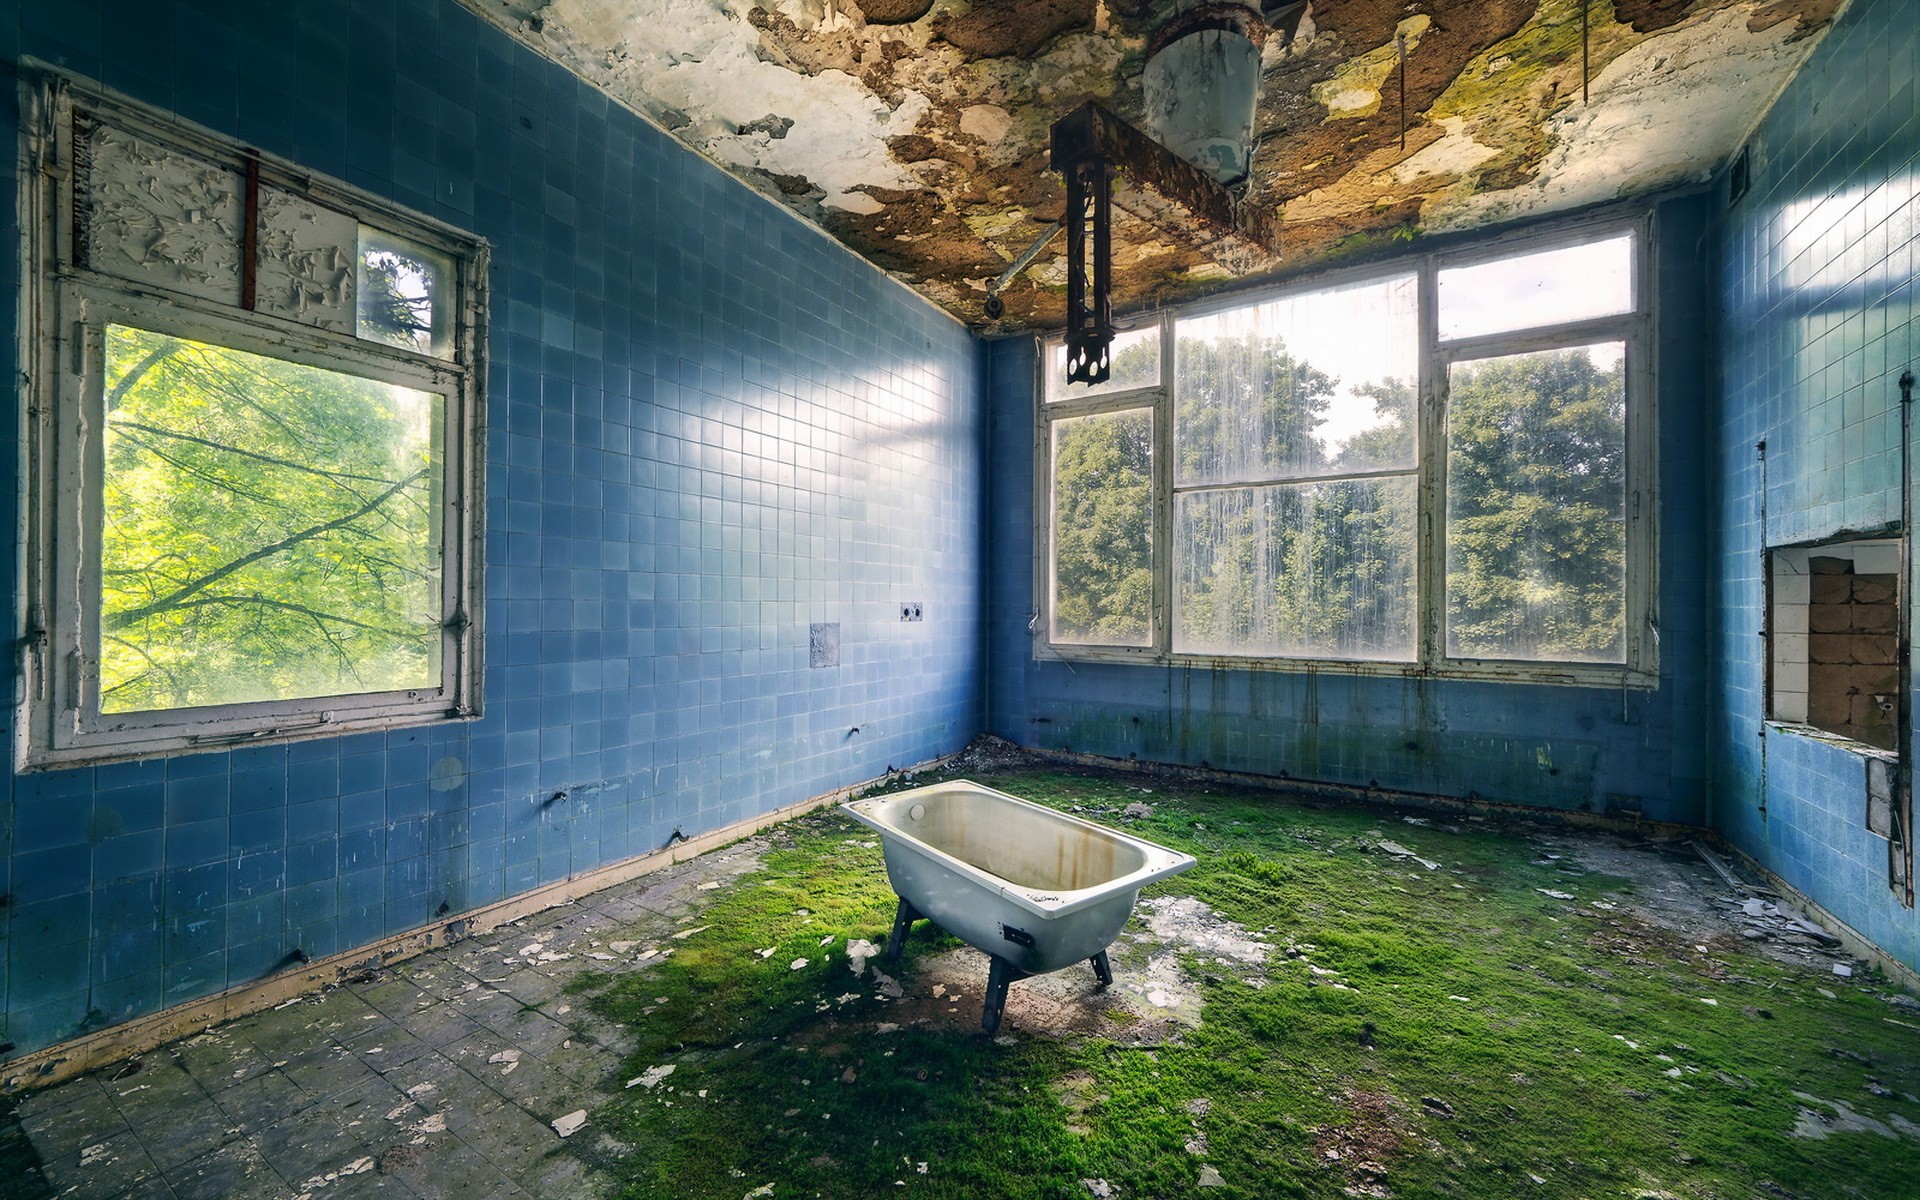 General 1920x1200 interior Fallout moss bathtub rust indoors abandoned ruins old